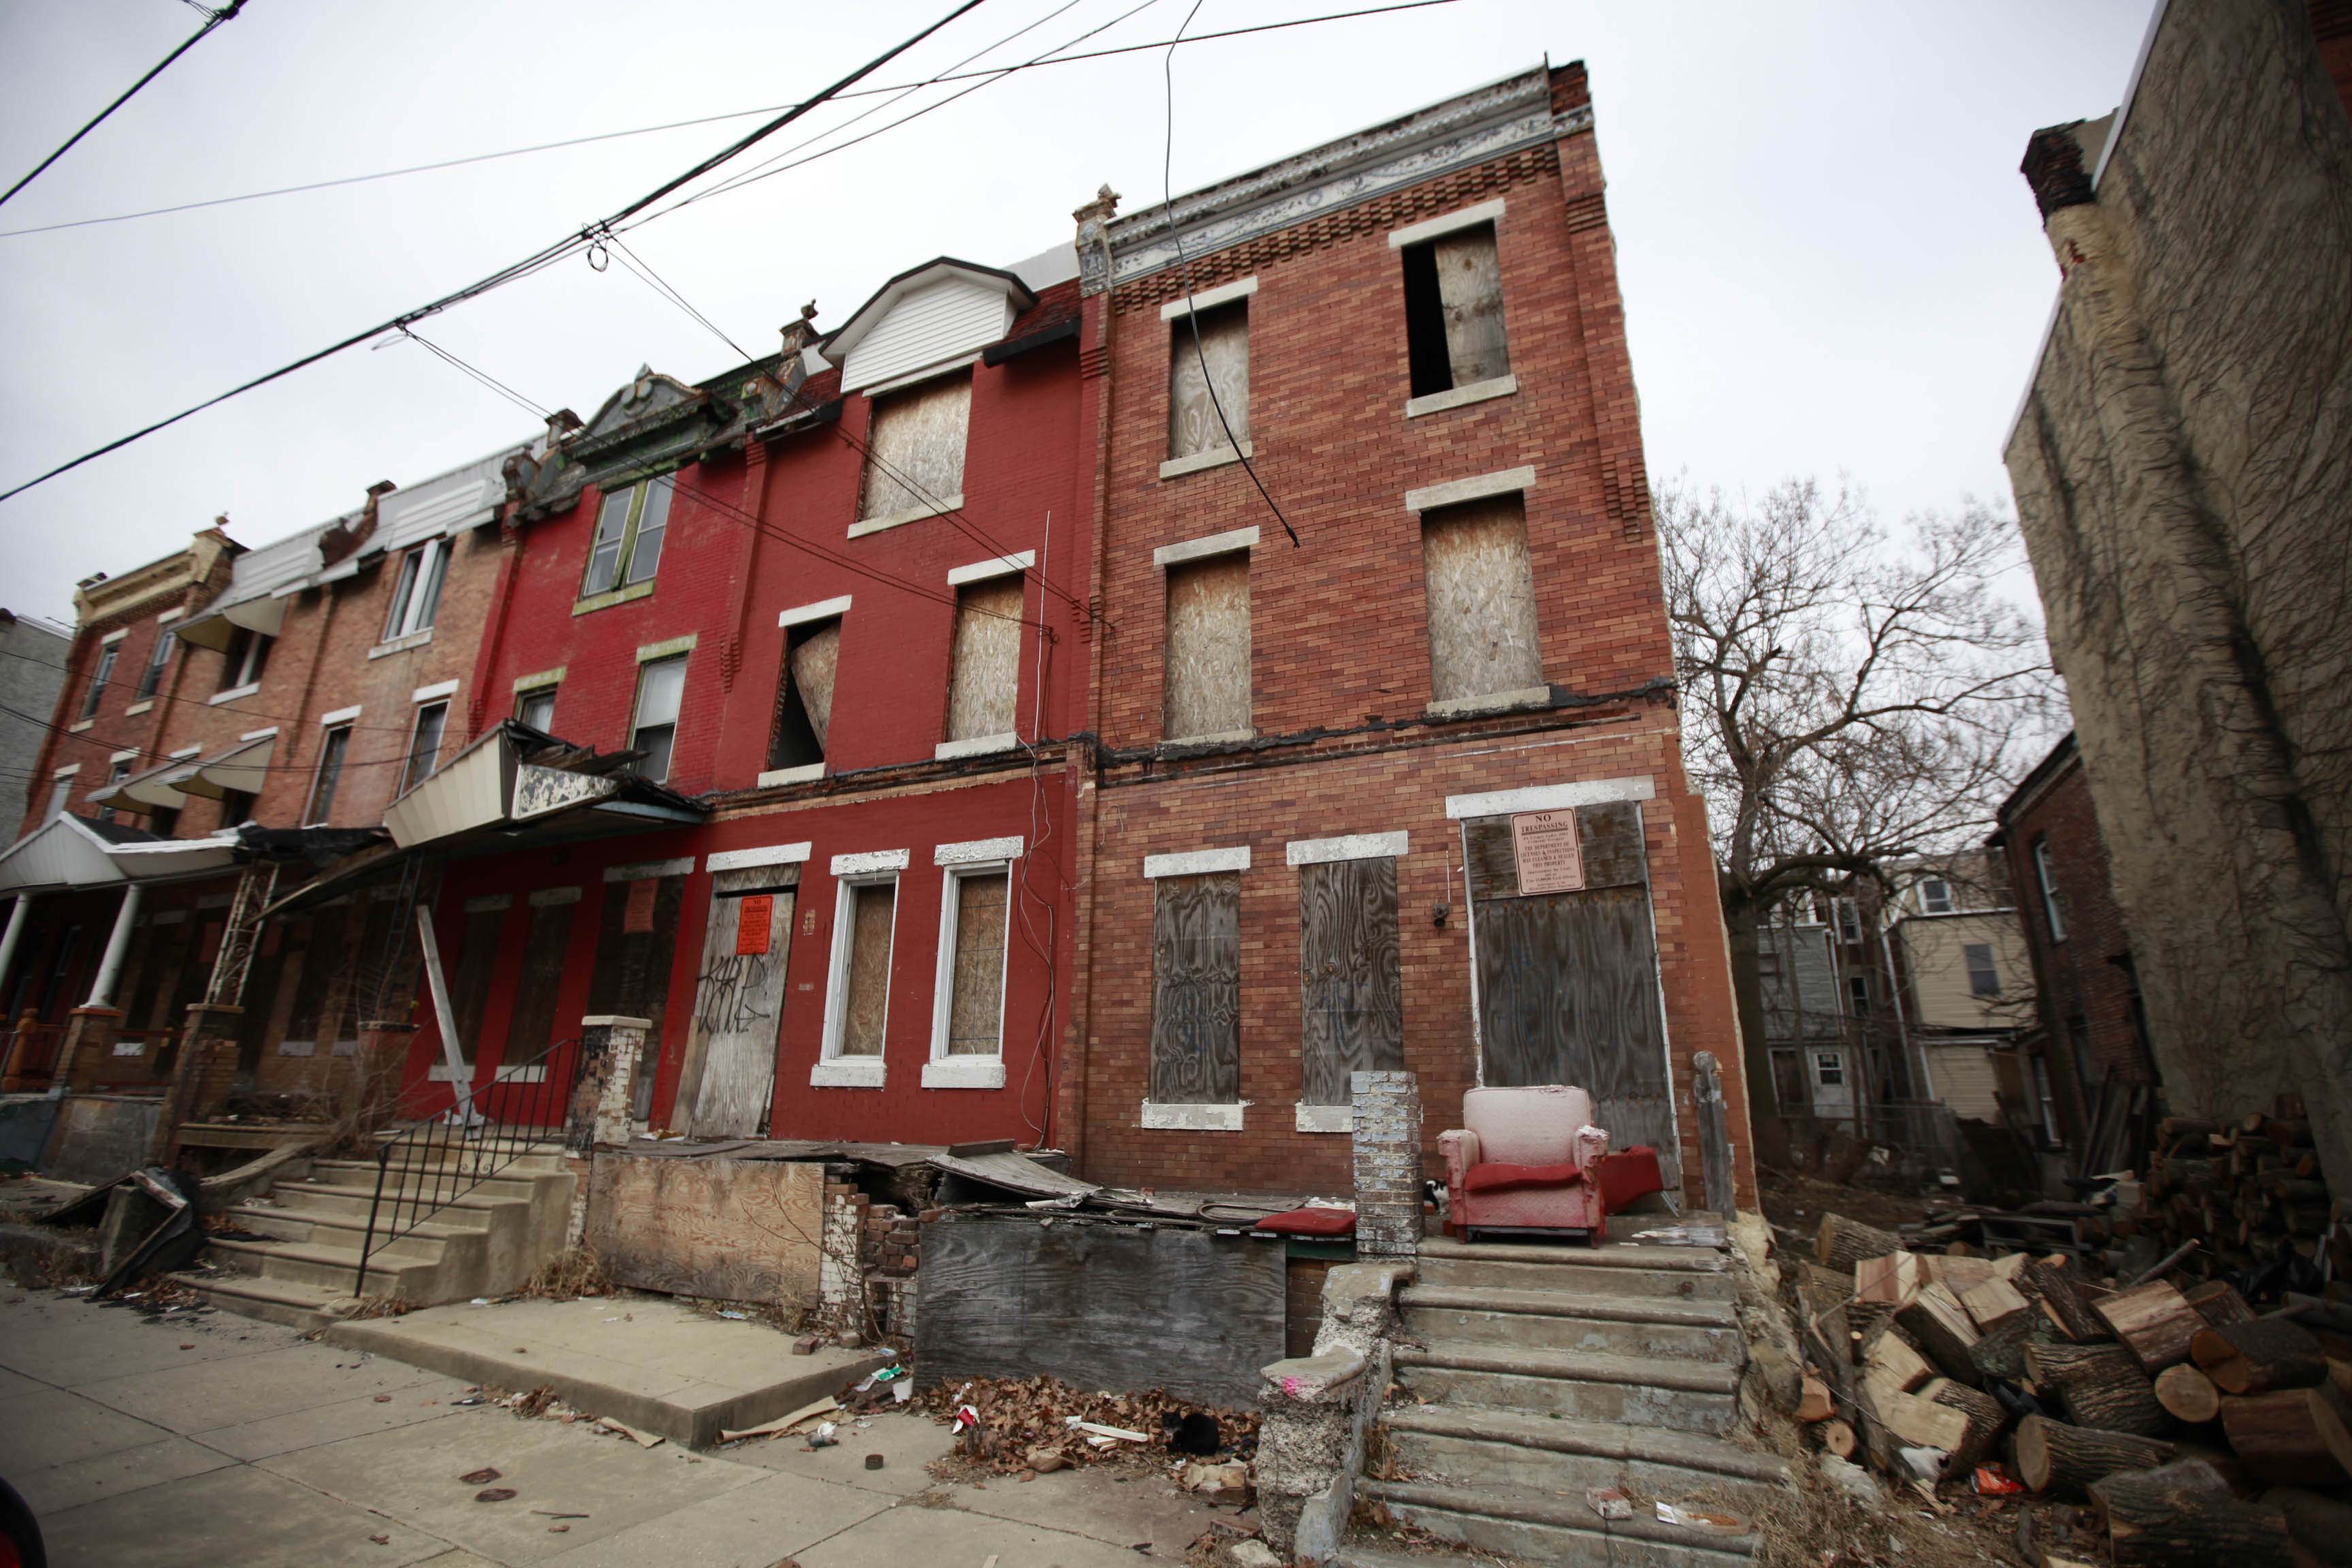 3831 Cambridge, property traced to Antoine Gardiner and photographed February 22, 2013. (David Swanson / Inquirer Staff Photographer)